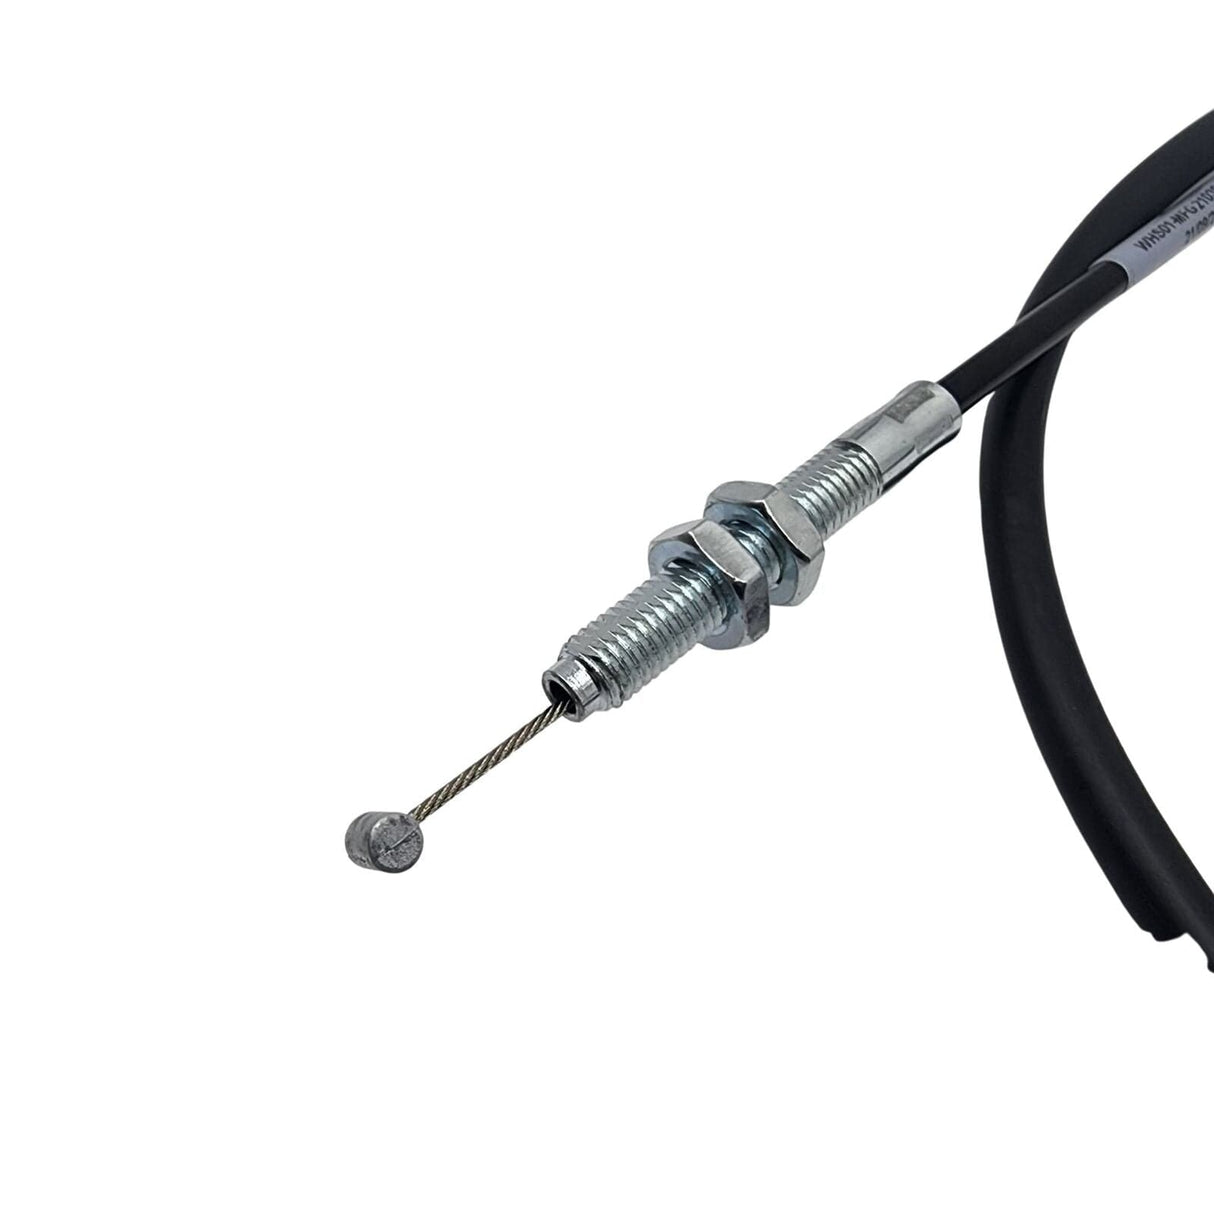 ACCELERATOR CABLE for VL RB30 - HOLDCOM AUTO PARTS